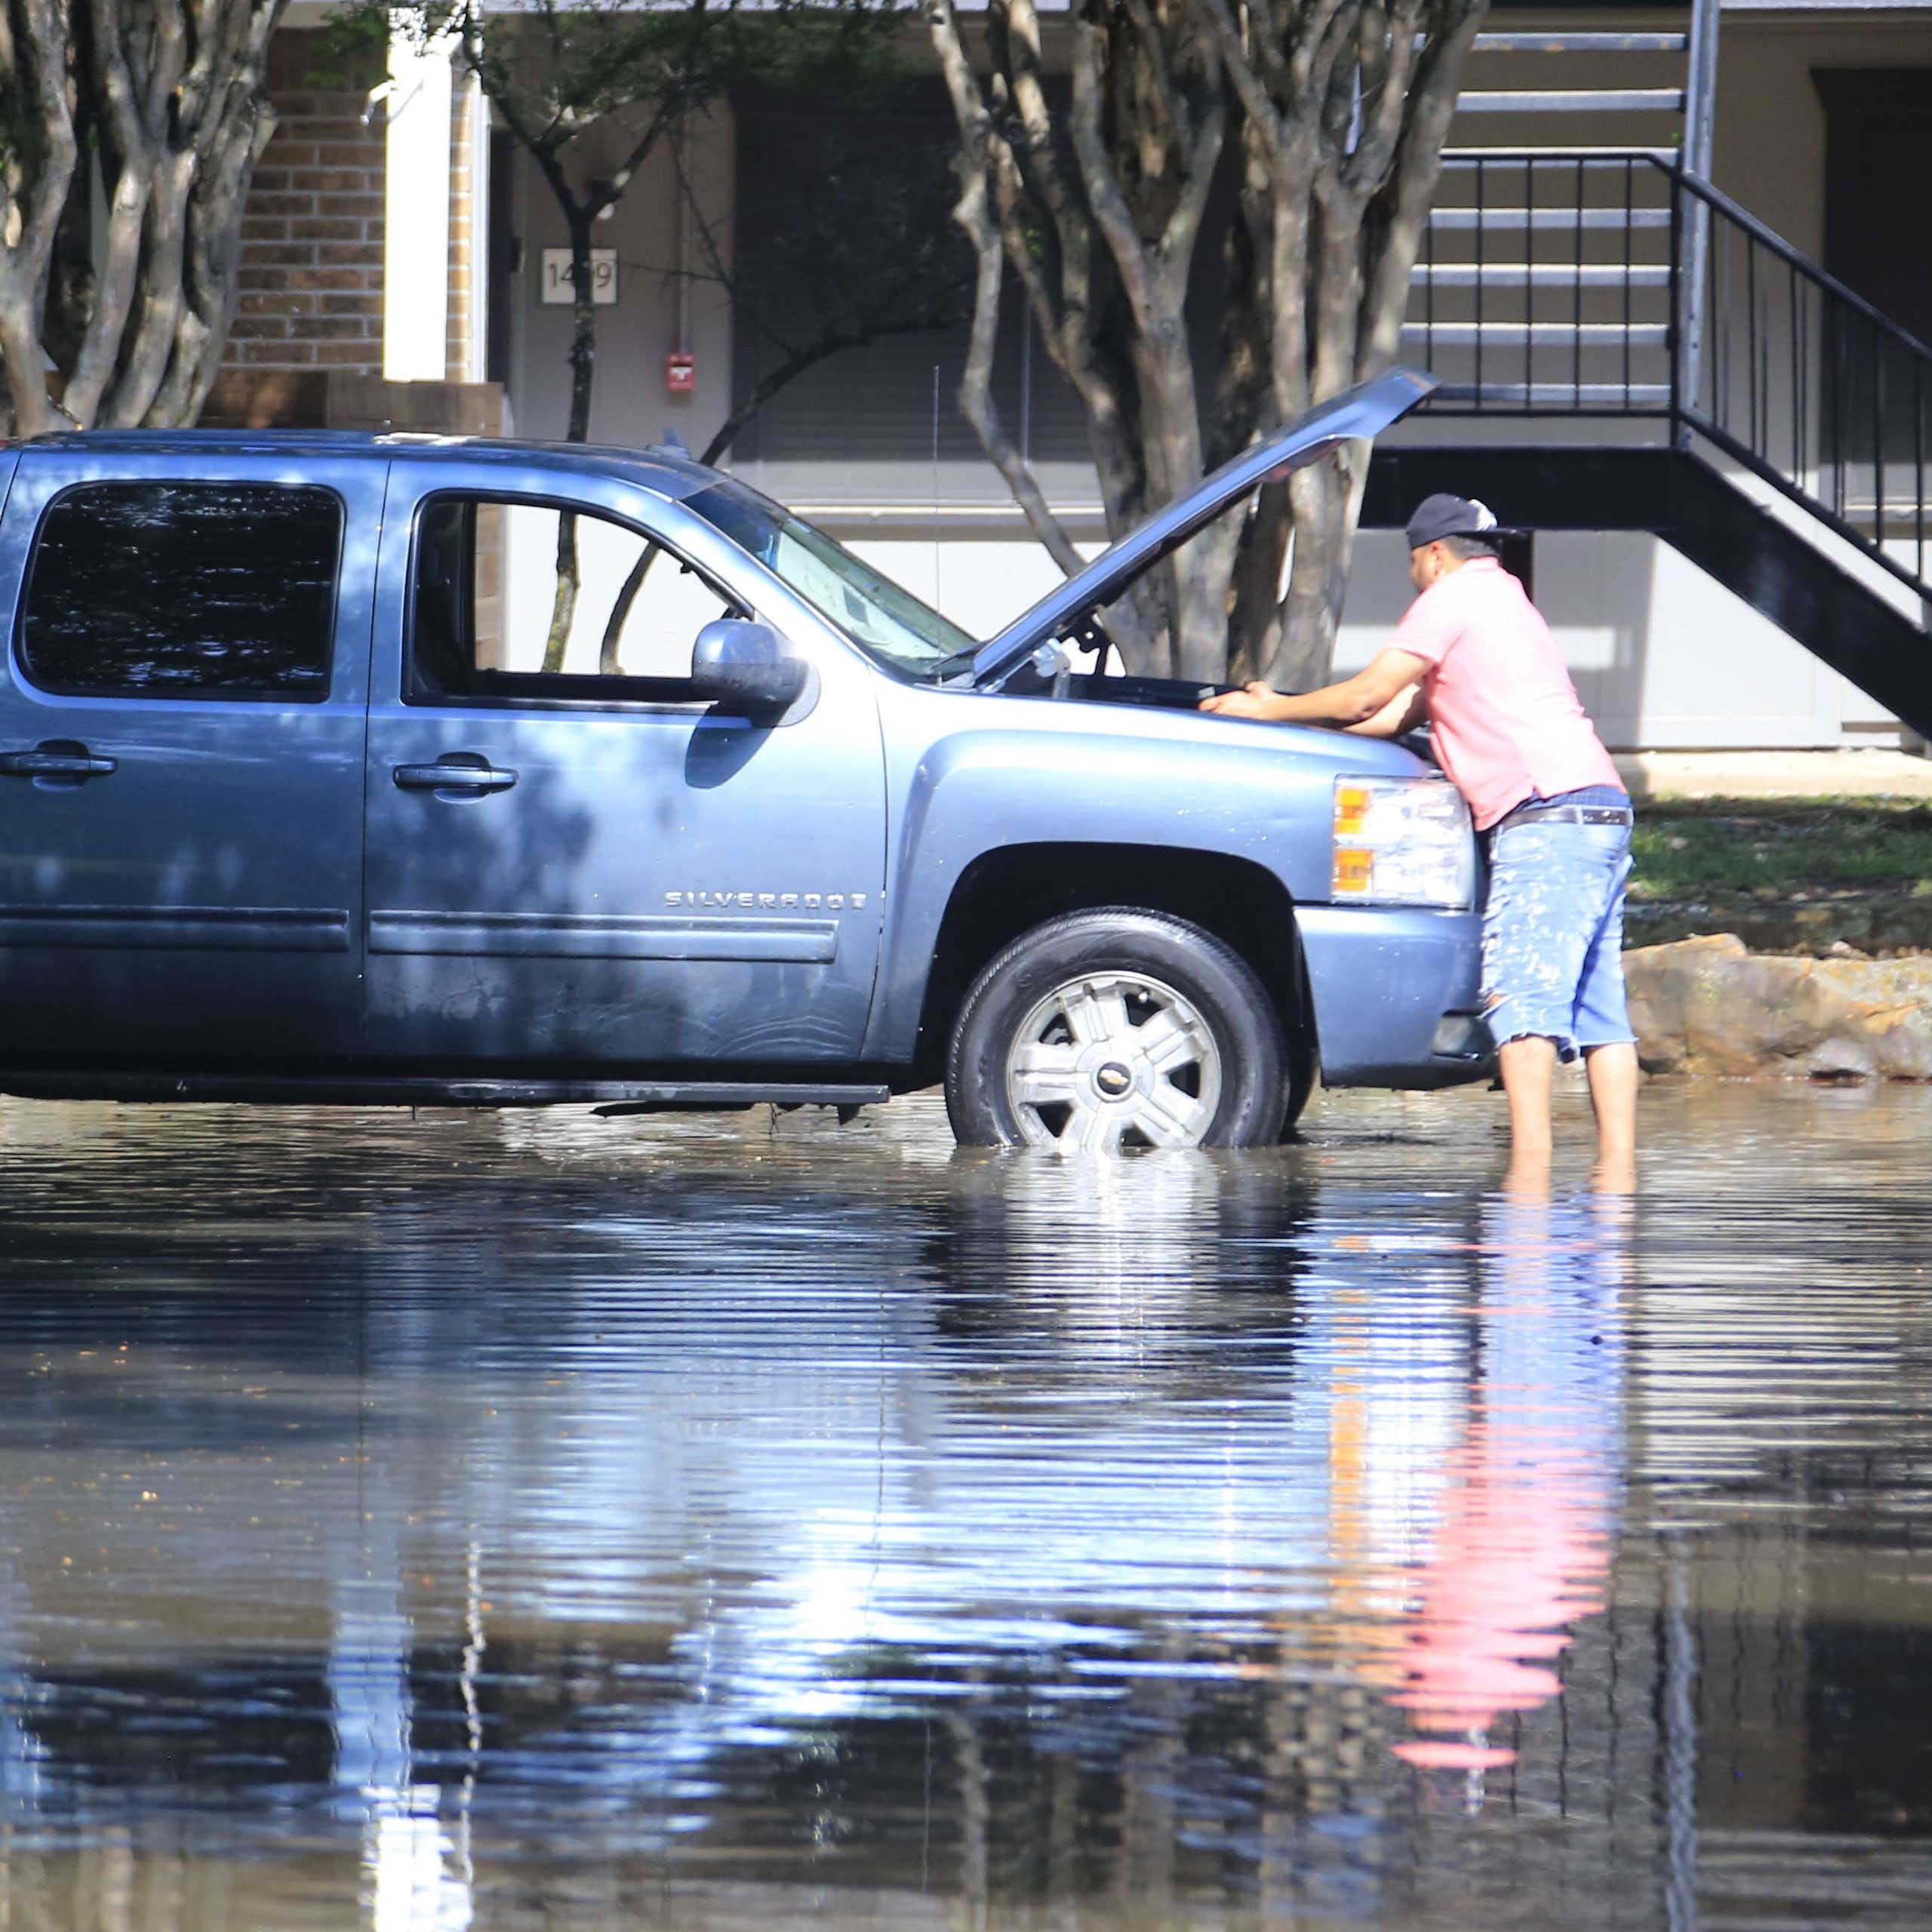 A man works on the engine of a truck while standing in floodwater over his ankles outside a home.